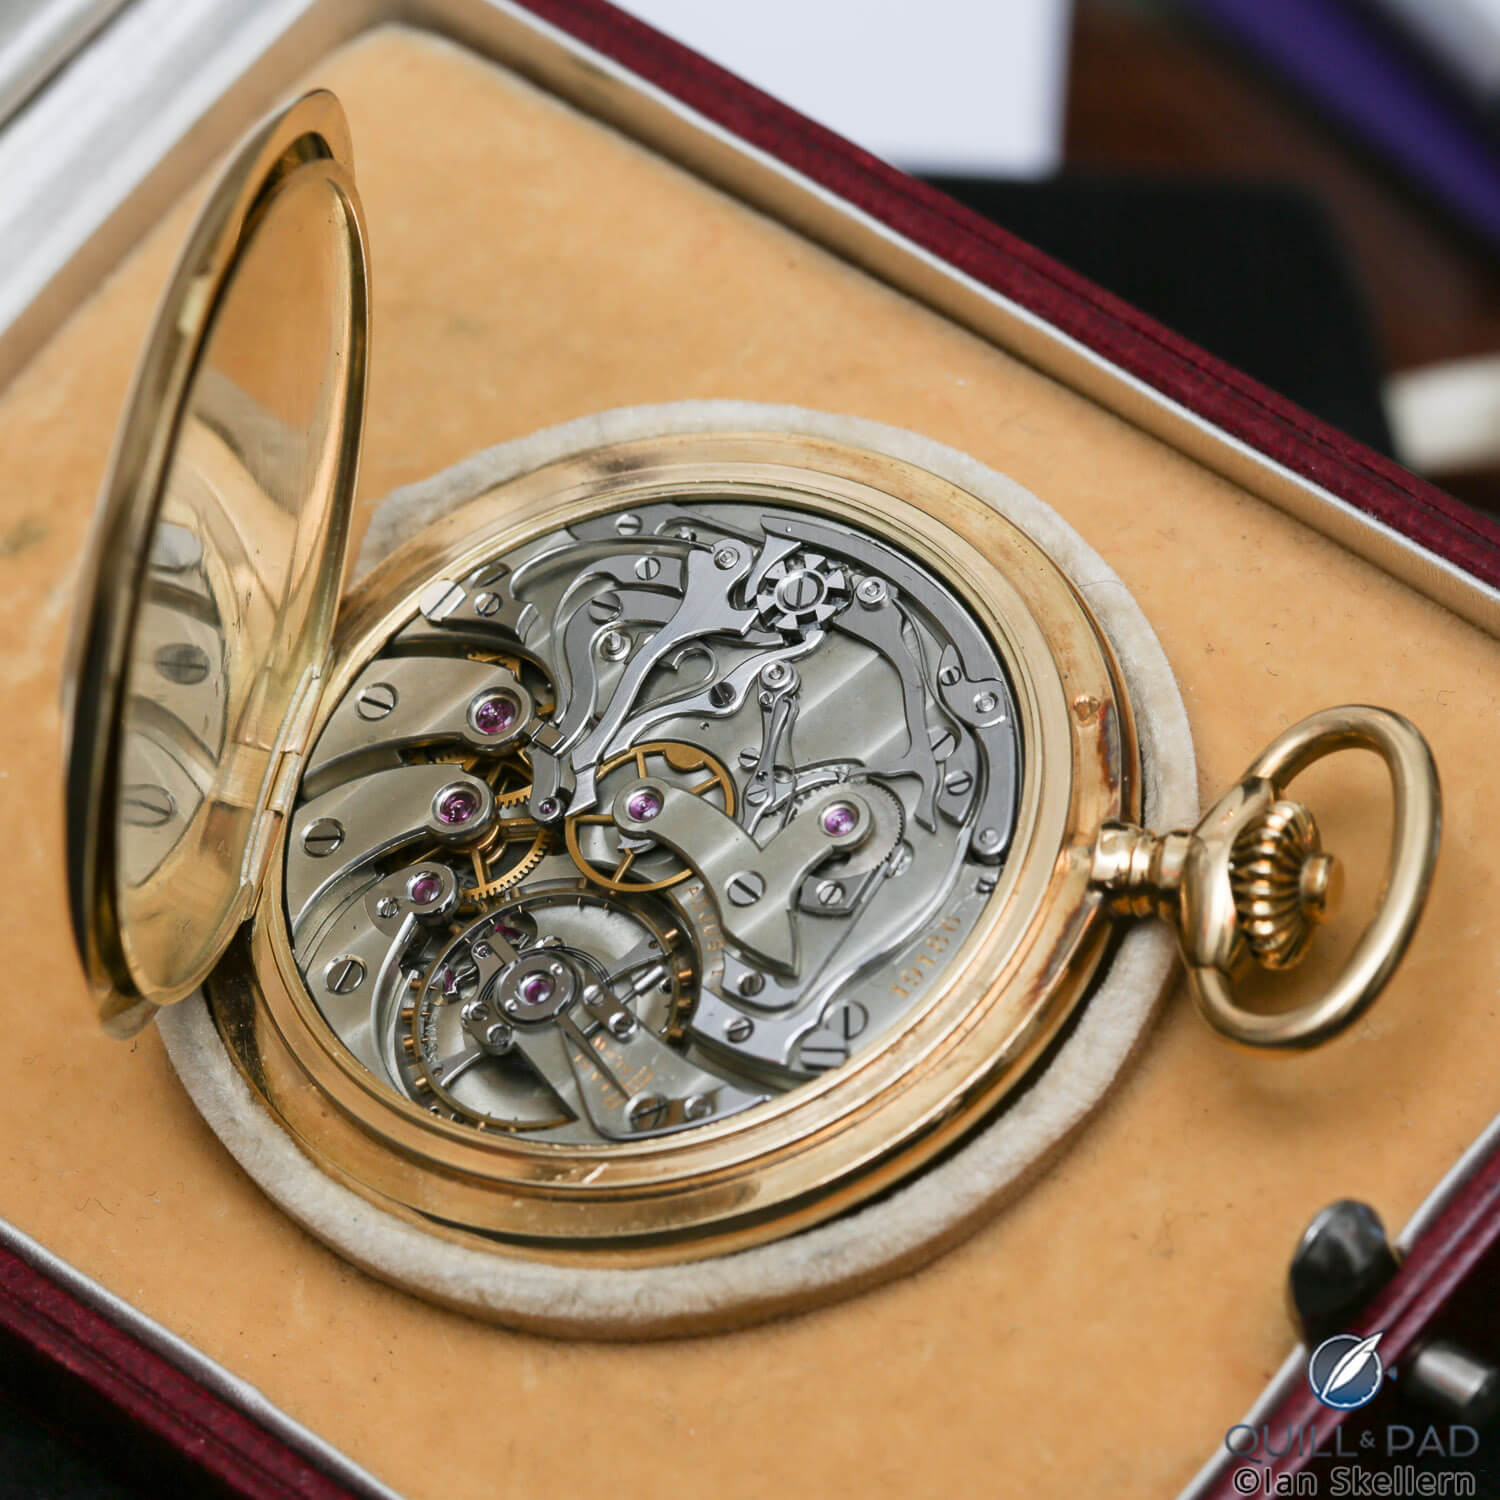 The movement of a Poitevin-LeJeune pocket watch chronograph from Gerd-Rüdiger Lang’s extensive chronograph collection